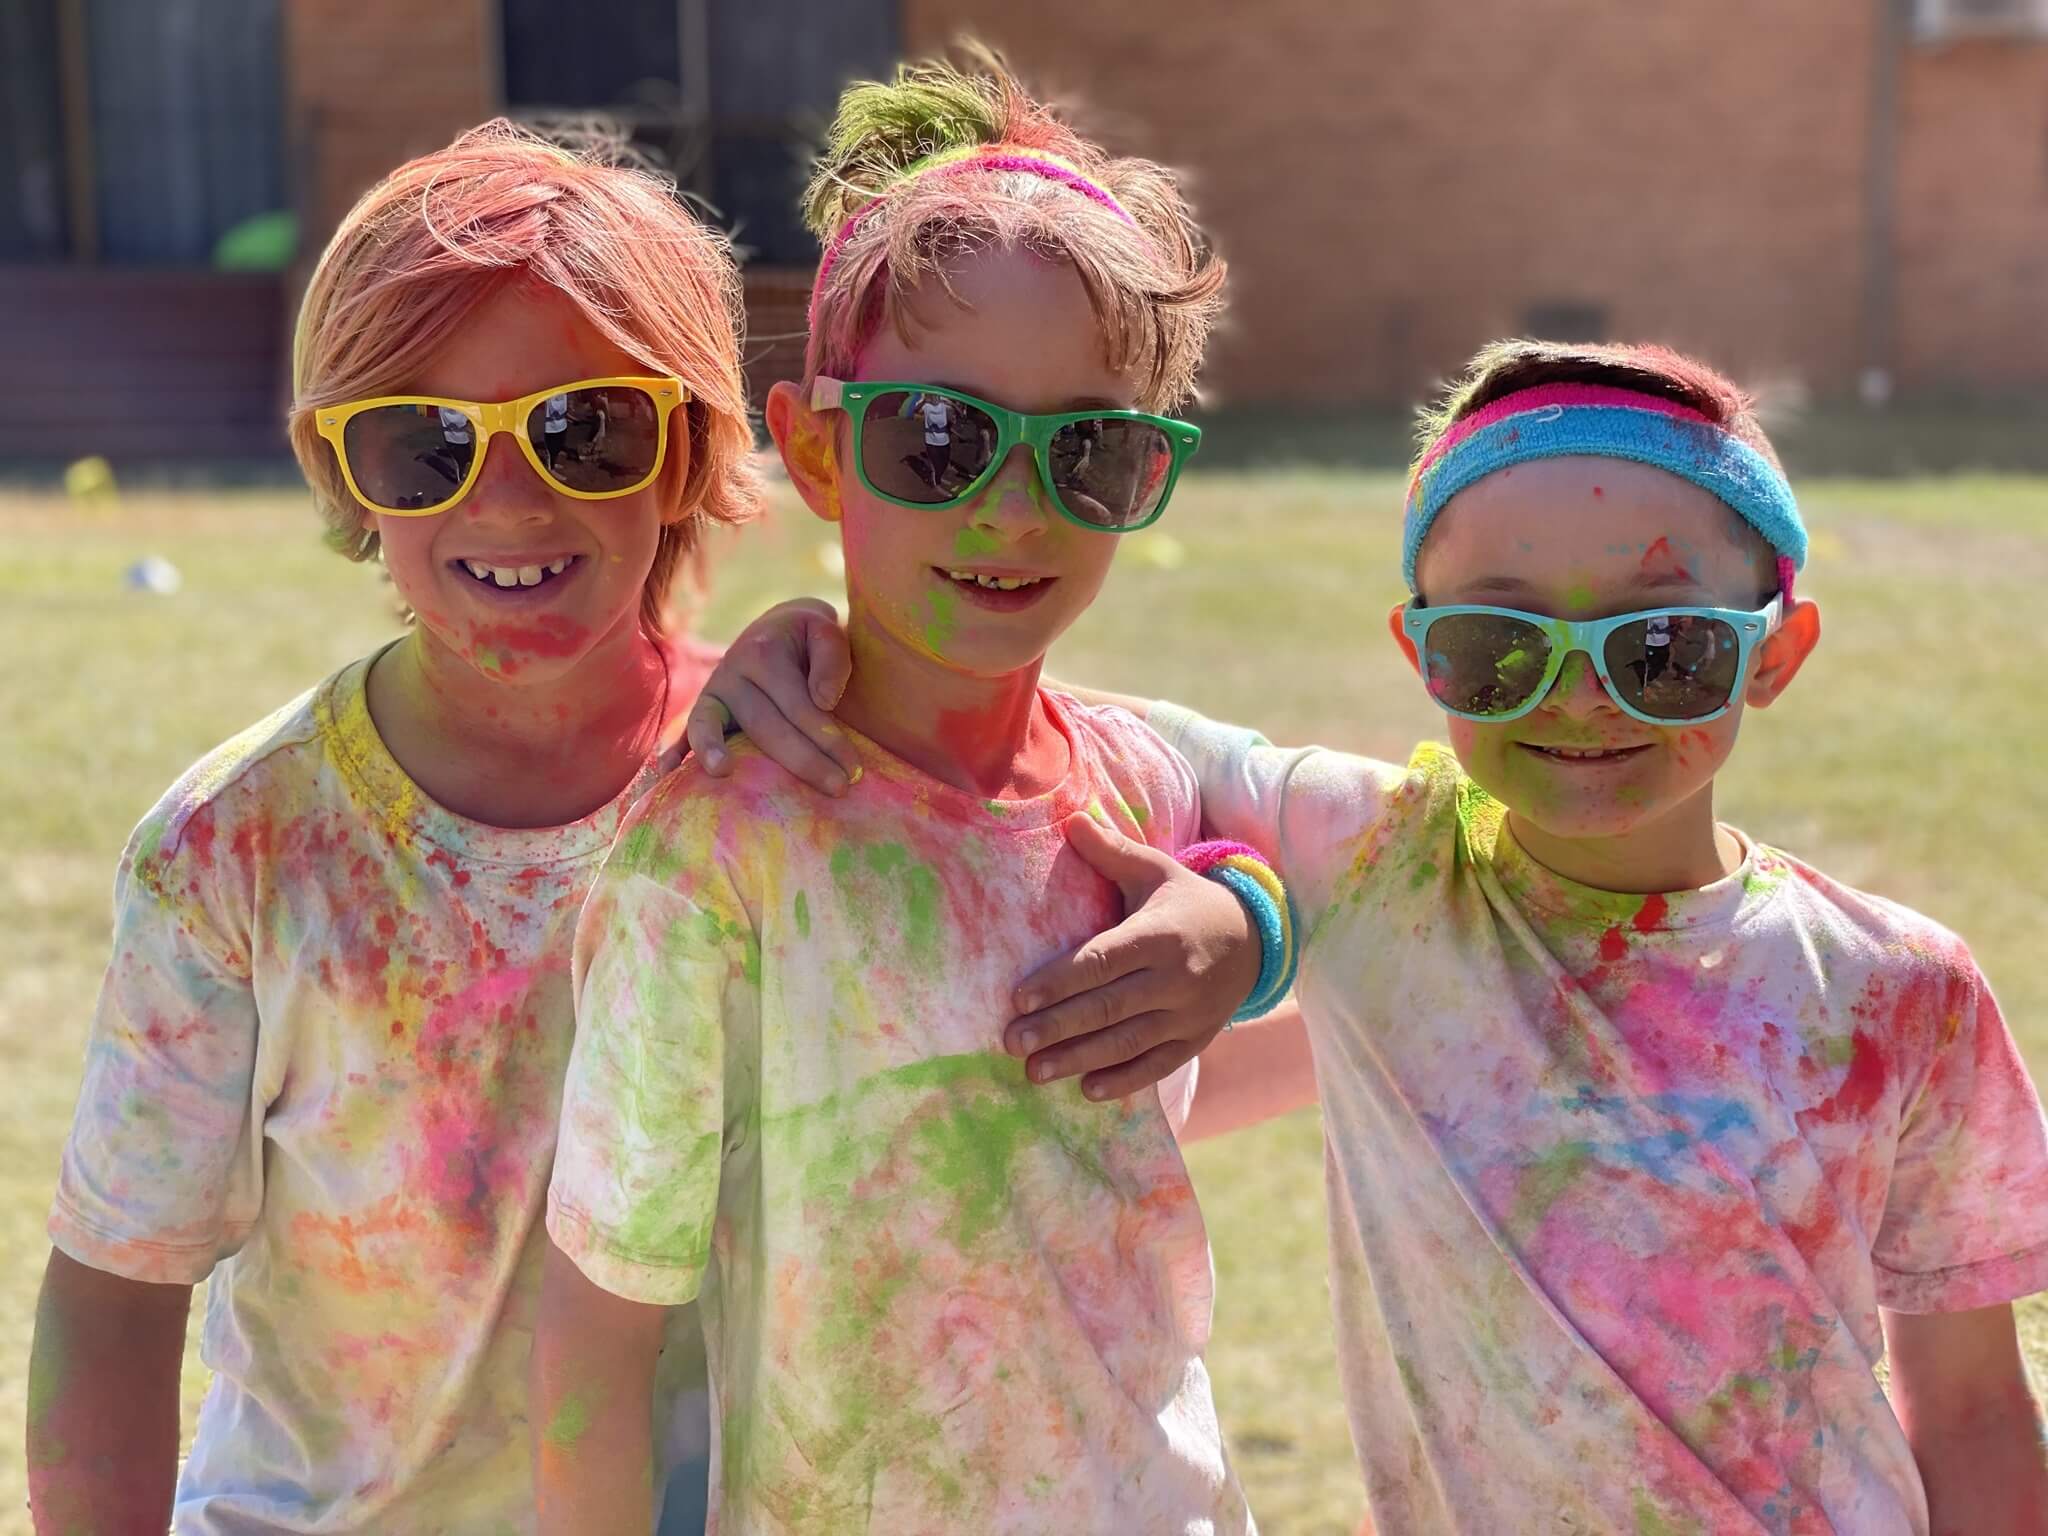 It's Easy to keep colour powder on your colour run shirt!